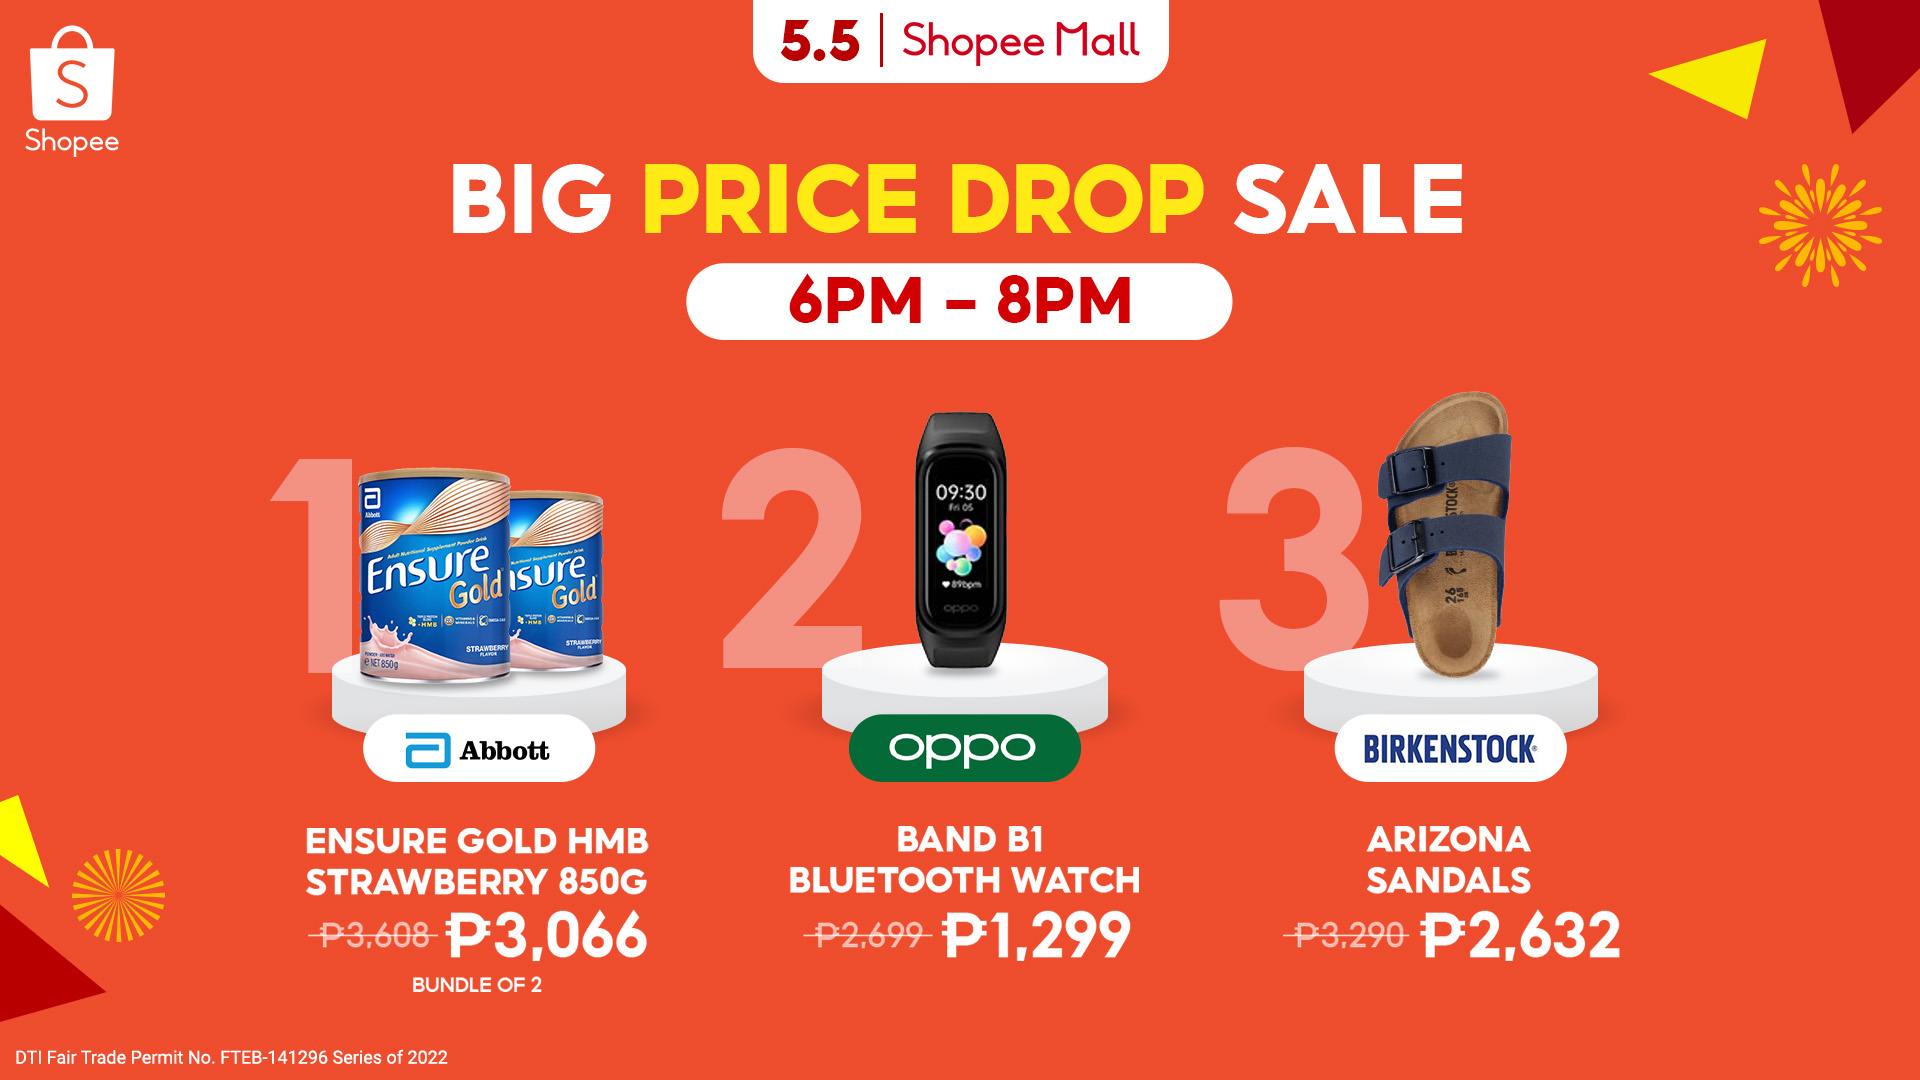 Add to cart now! Get brand new smart phones, home appliances, travel and everyday essentials on unbelievable deals during the Shopee 5.5 Brands Festival